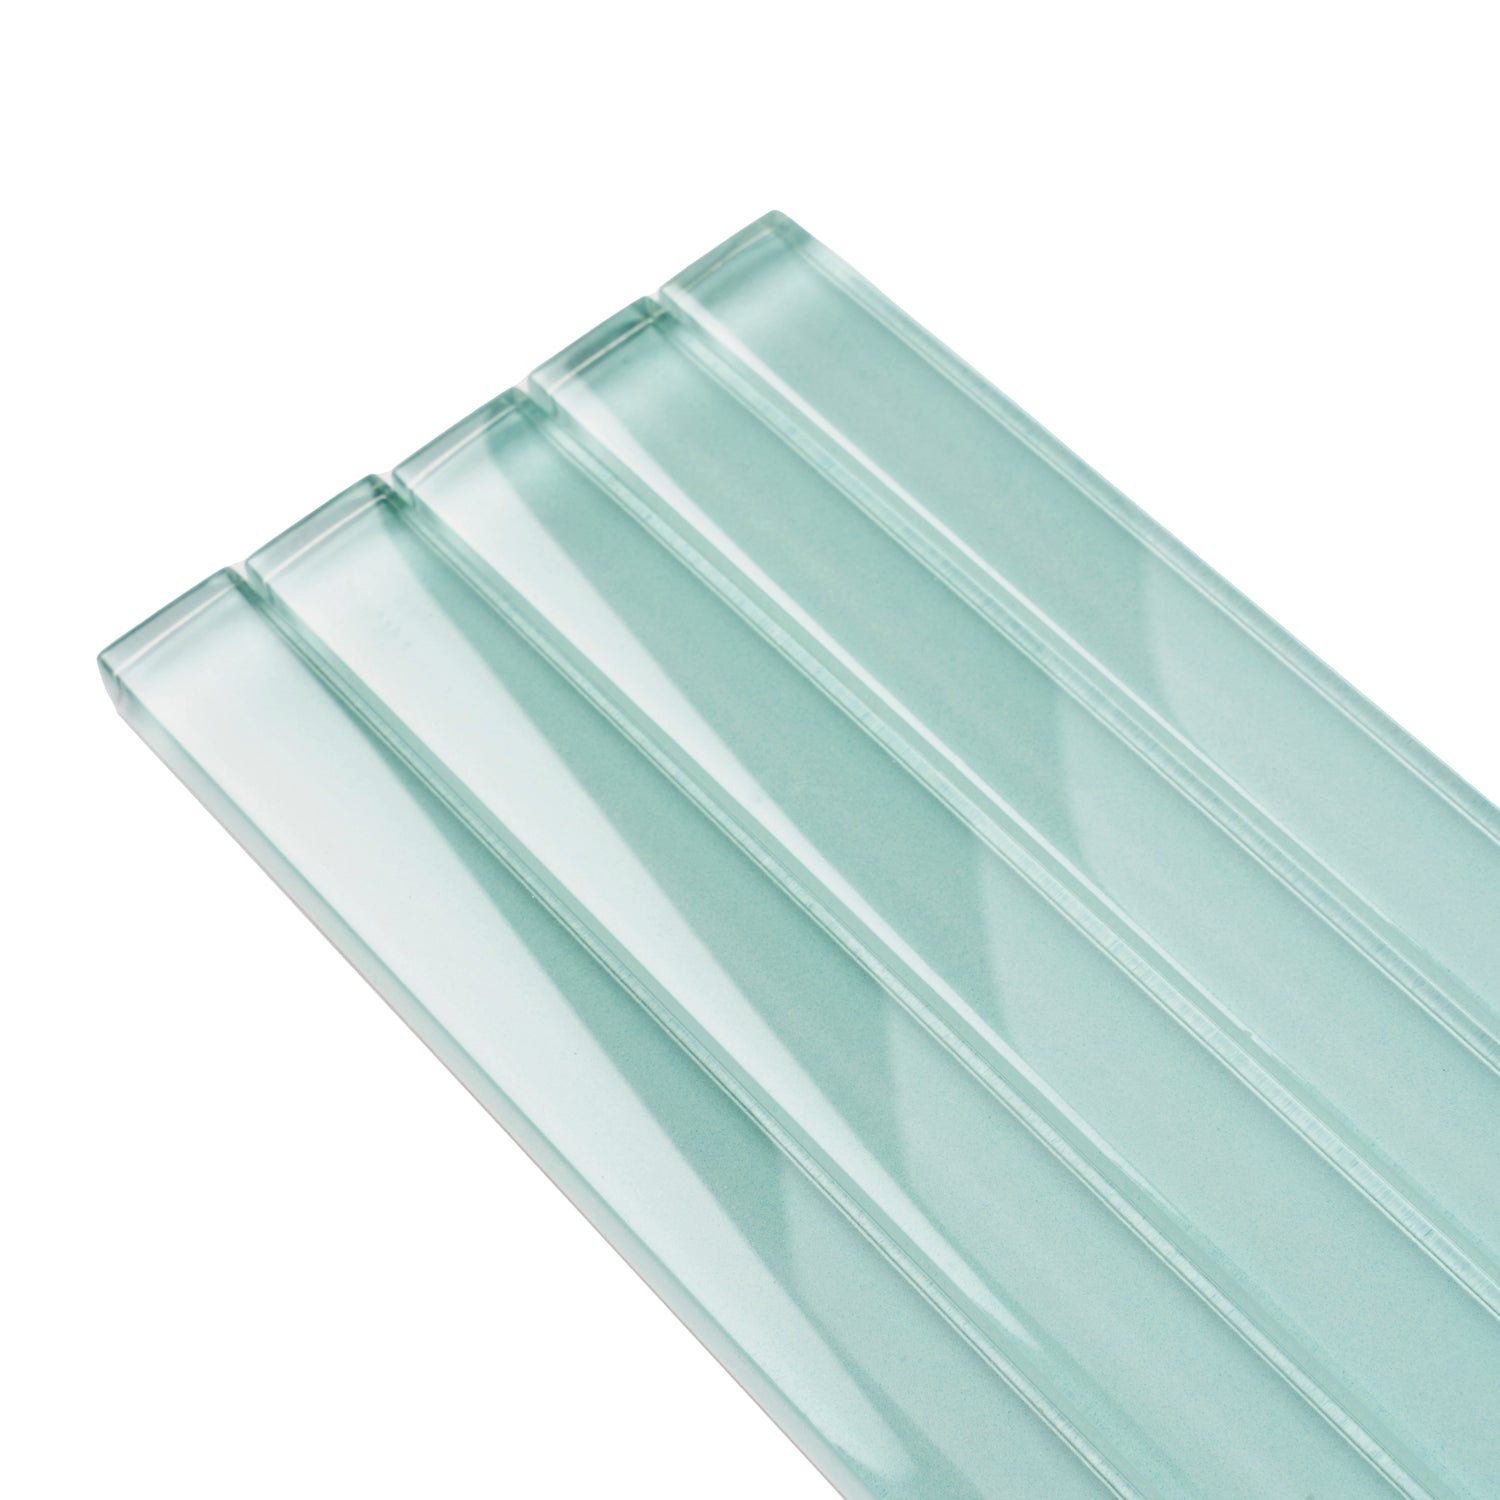 10 pack Blizzard Blue 0.6-in W x 12-in L Glass Glossy Pencil Liner Tile Trim (0.5 Sq ft/case)